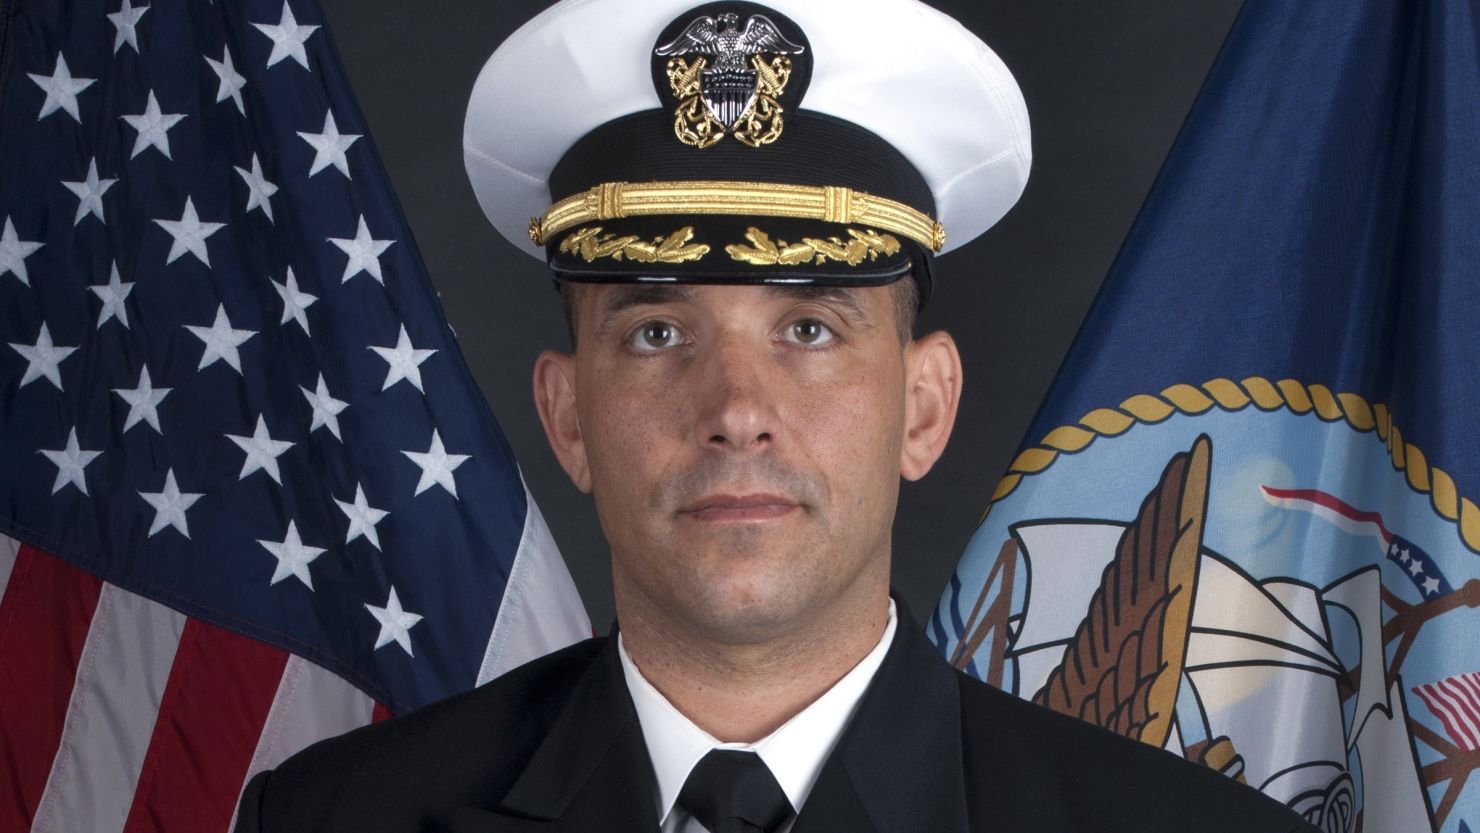 The Navy is investigating the apparent suicide of Navy Cmdr. Job W. Price in Afghanistan, a U.S. military official tells CNN.